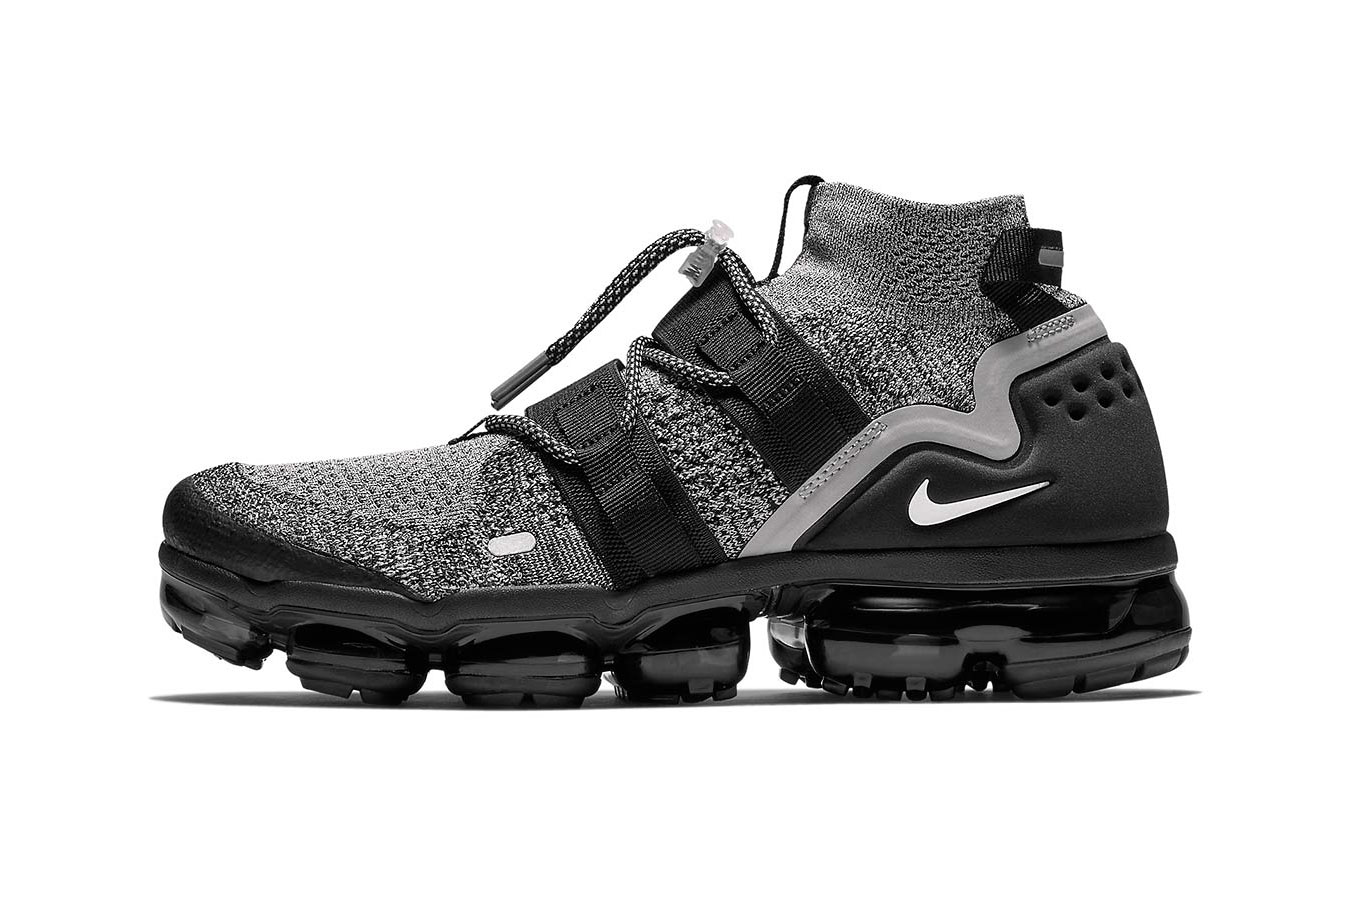 Sense of guilt crater cock Nike VaporMax Flyknit Utility "Moon Particle" | Hypebeast